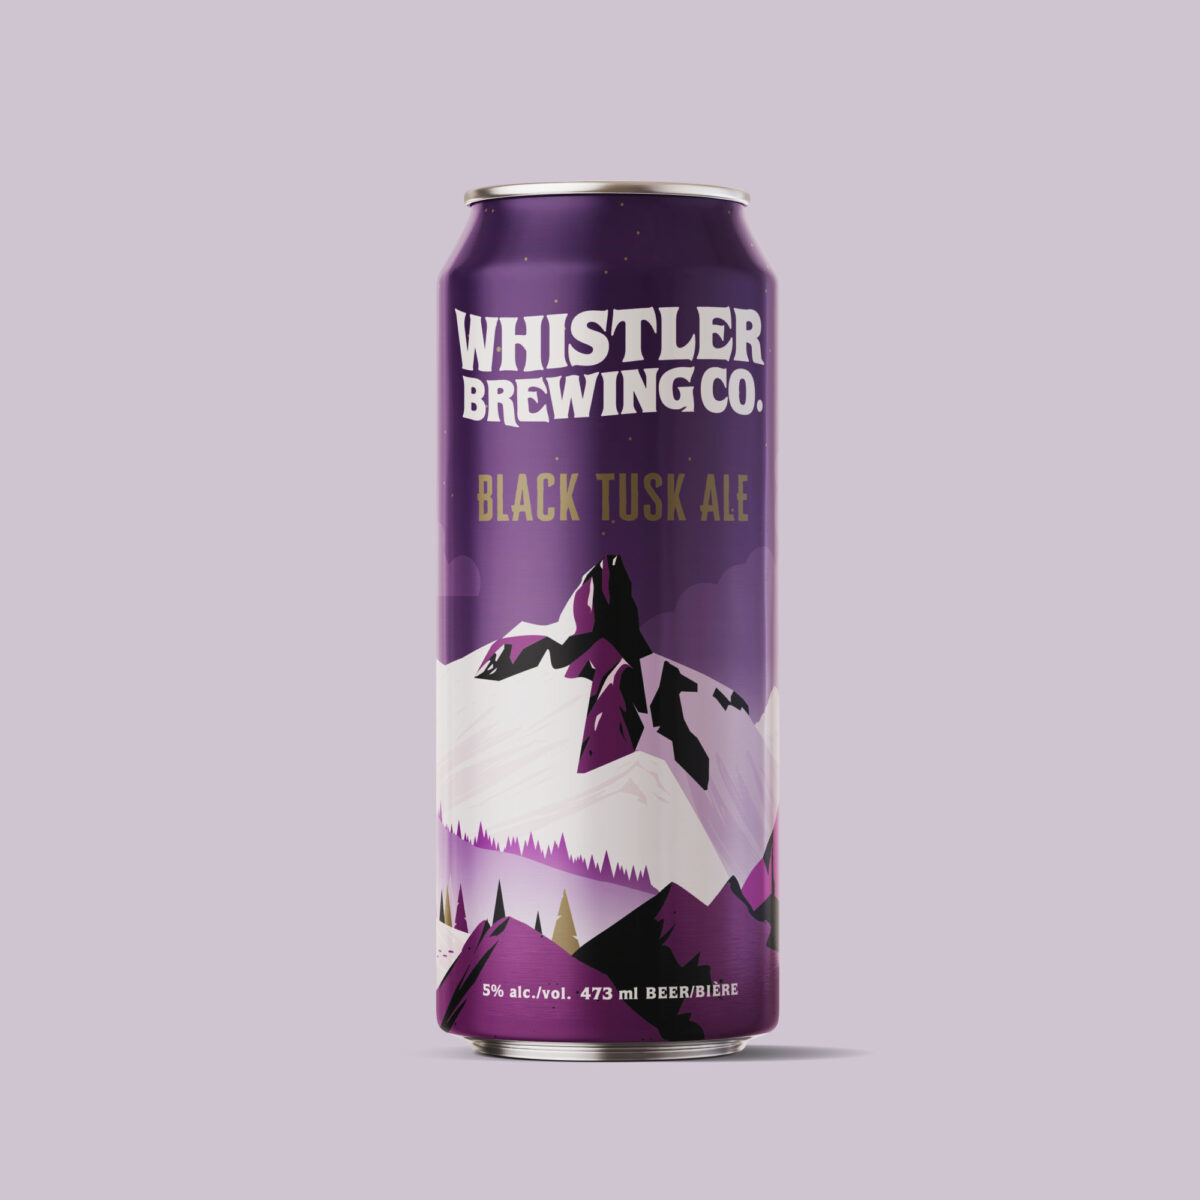 Whistler Brewery by Sobi Branding & Graphic Design Collective led by Anna Sobieniak